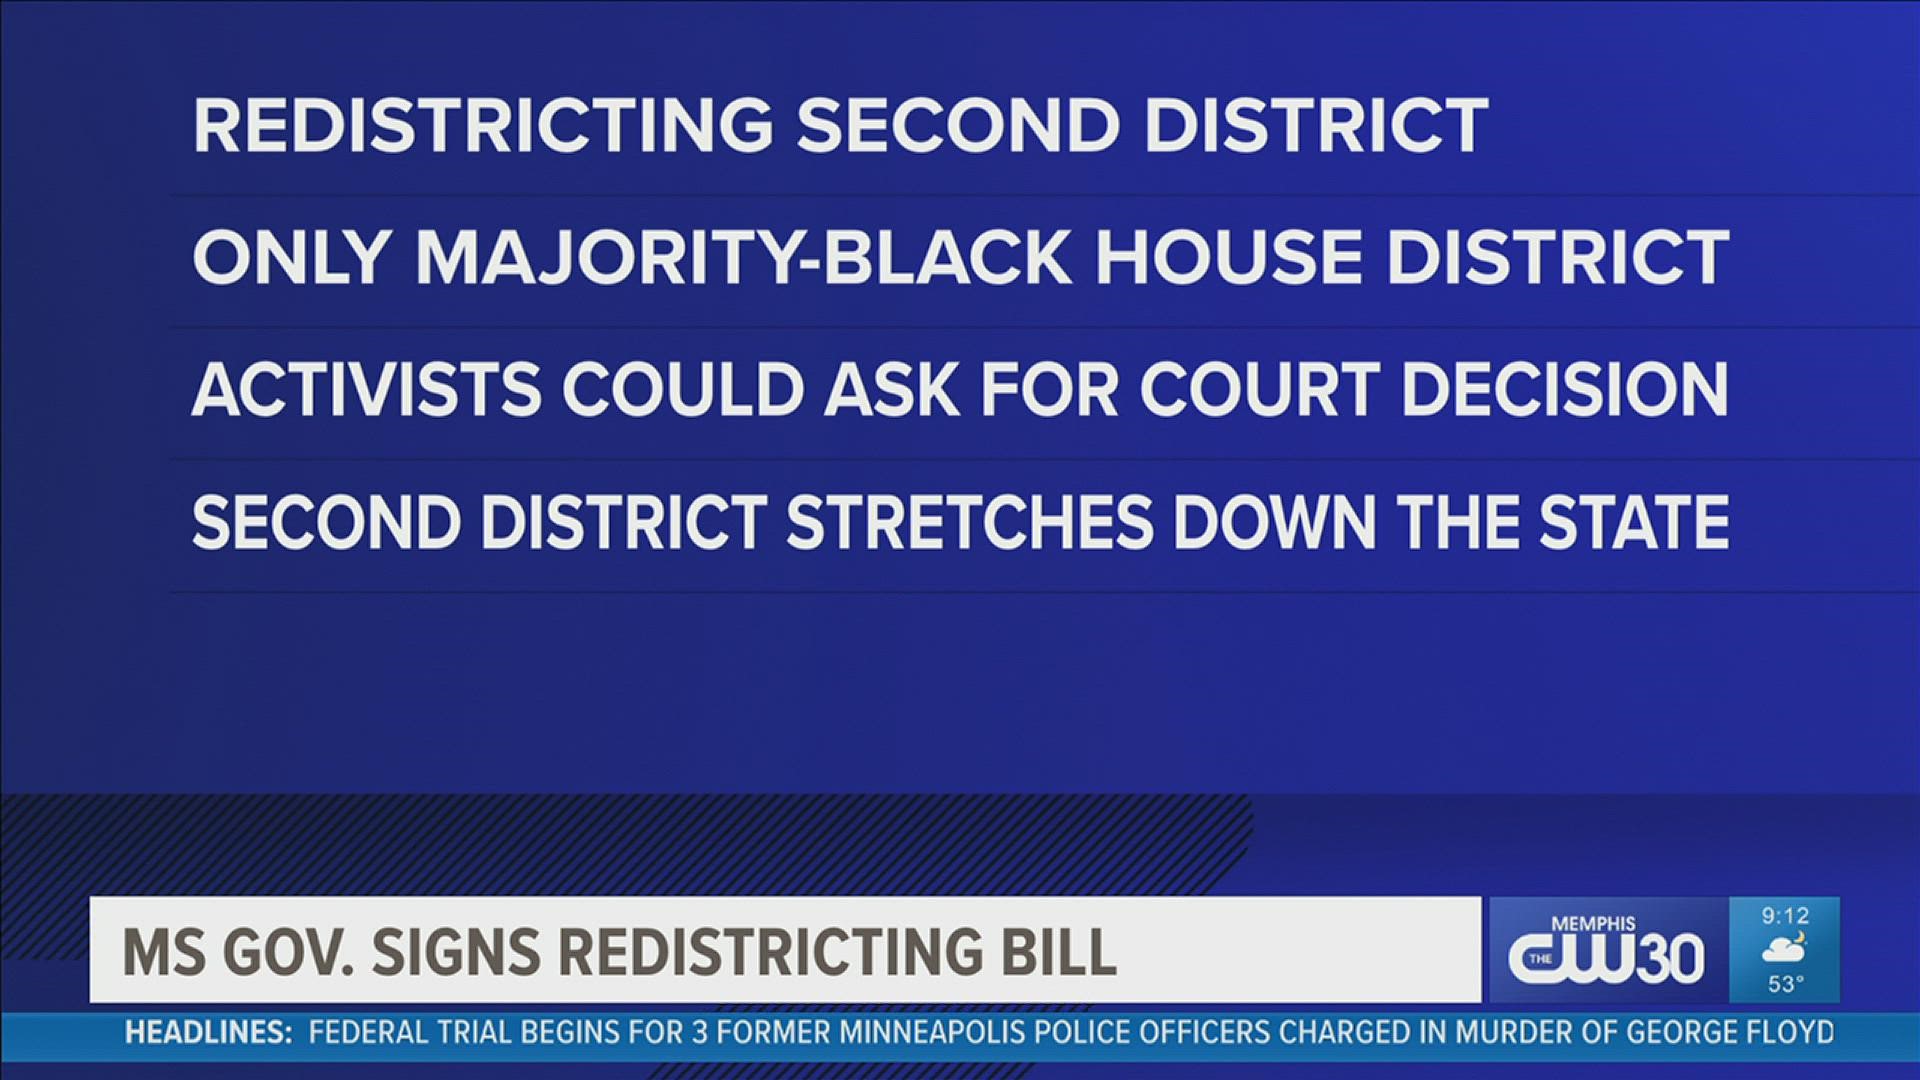 The NAACP or other opponents could still ask a federal court to consider whether the new districts dilute the influence of Black voters.